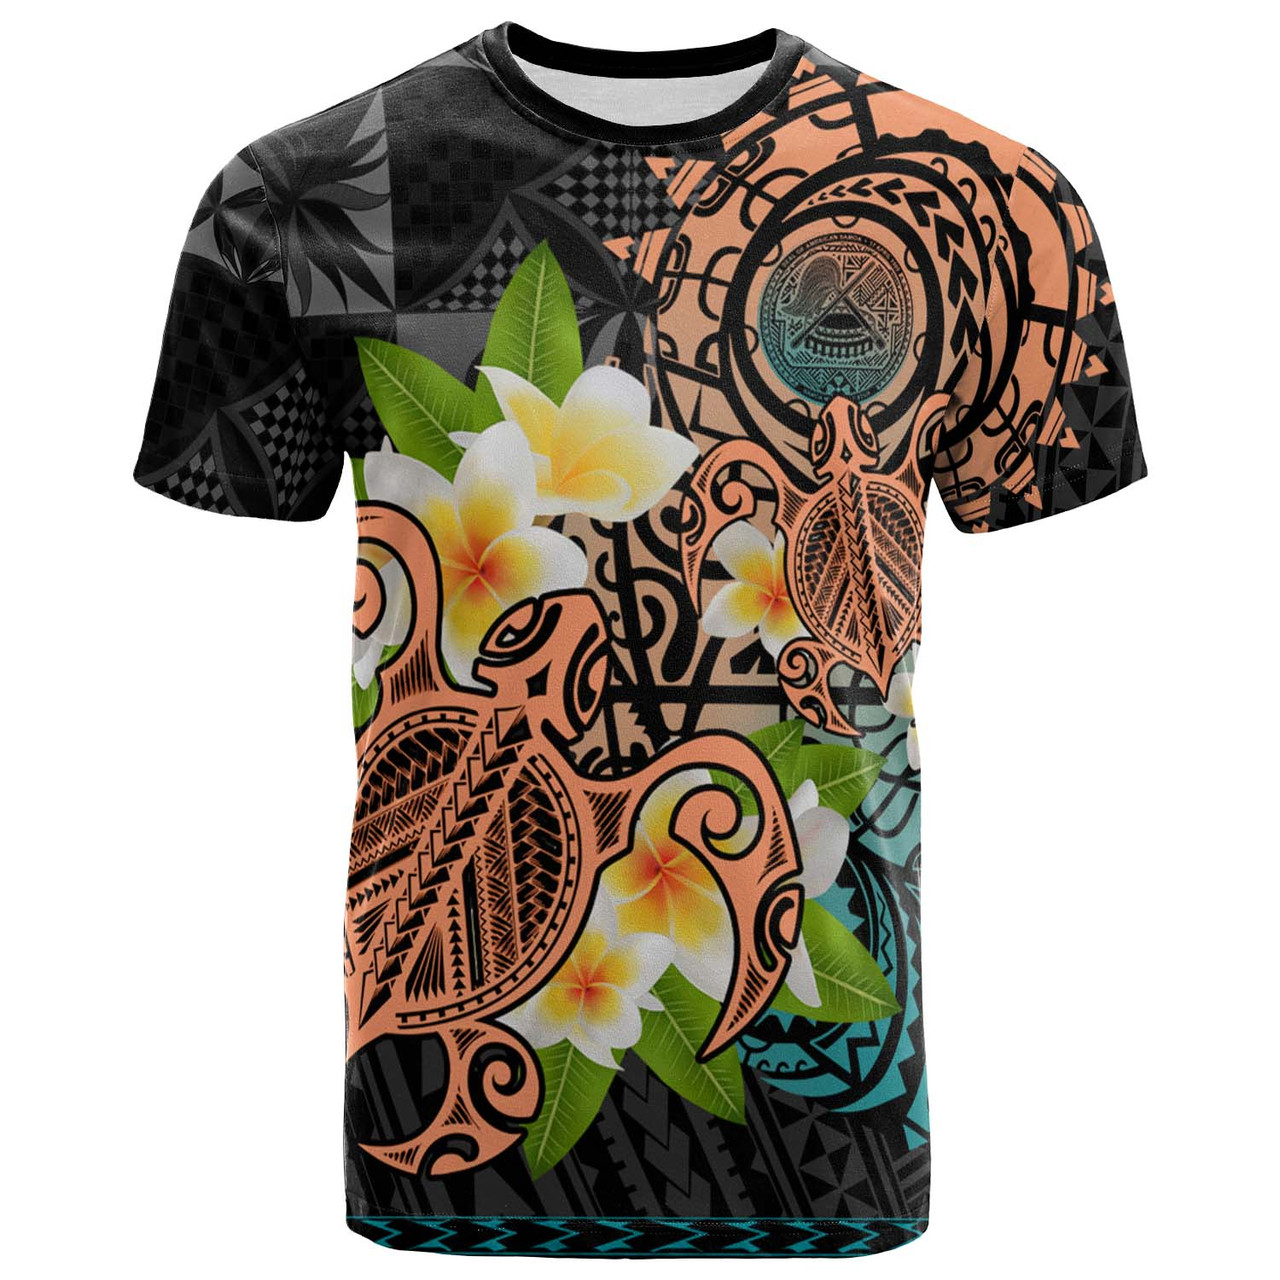 American Samoa T-shirt - Polynesian Culture with Pumeria Flower and Turtle Siapo Patterns